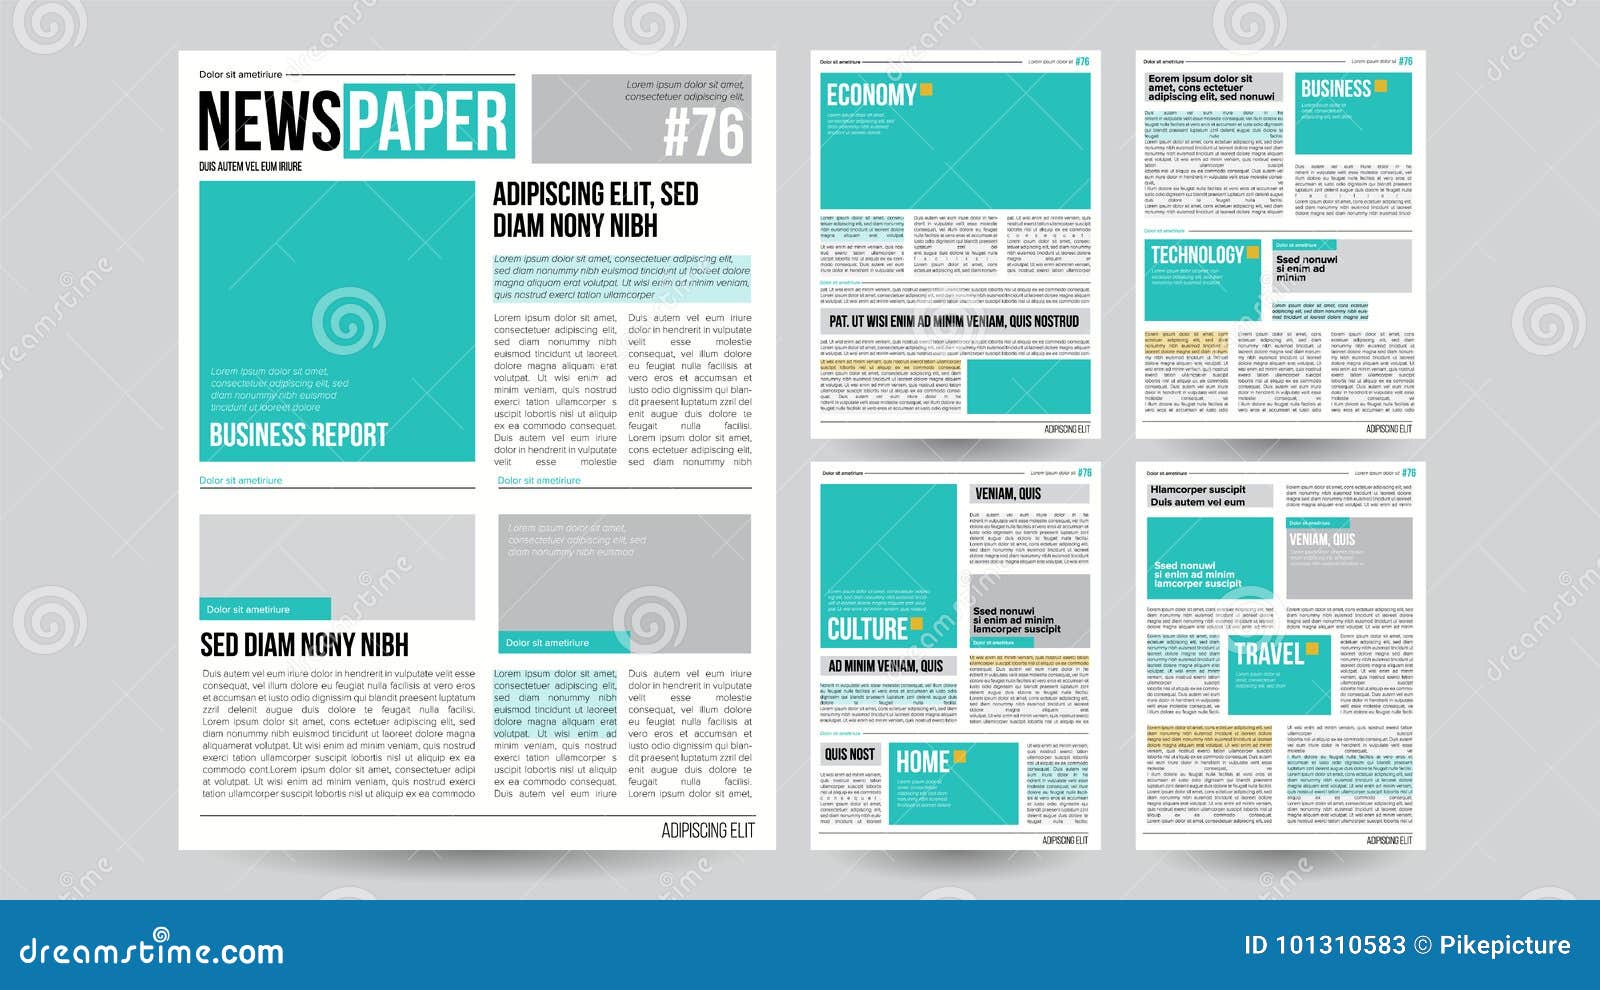 Newspaper Report Template from thumbs.dreamstime.com